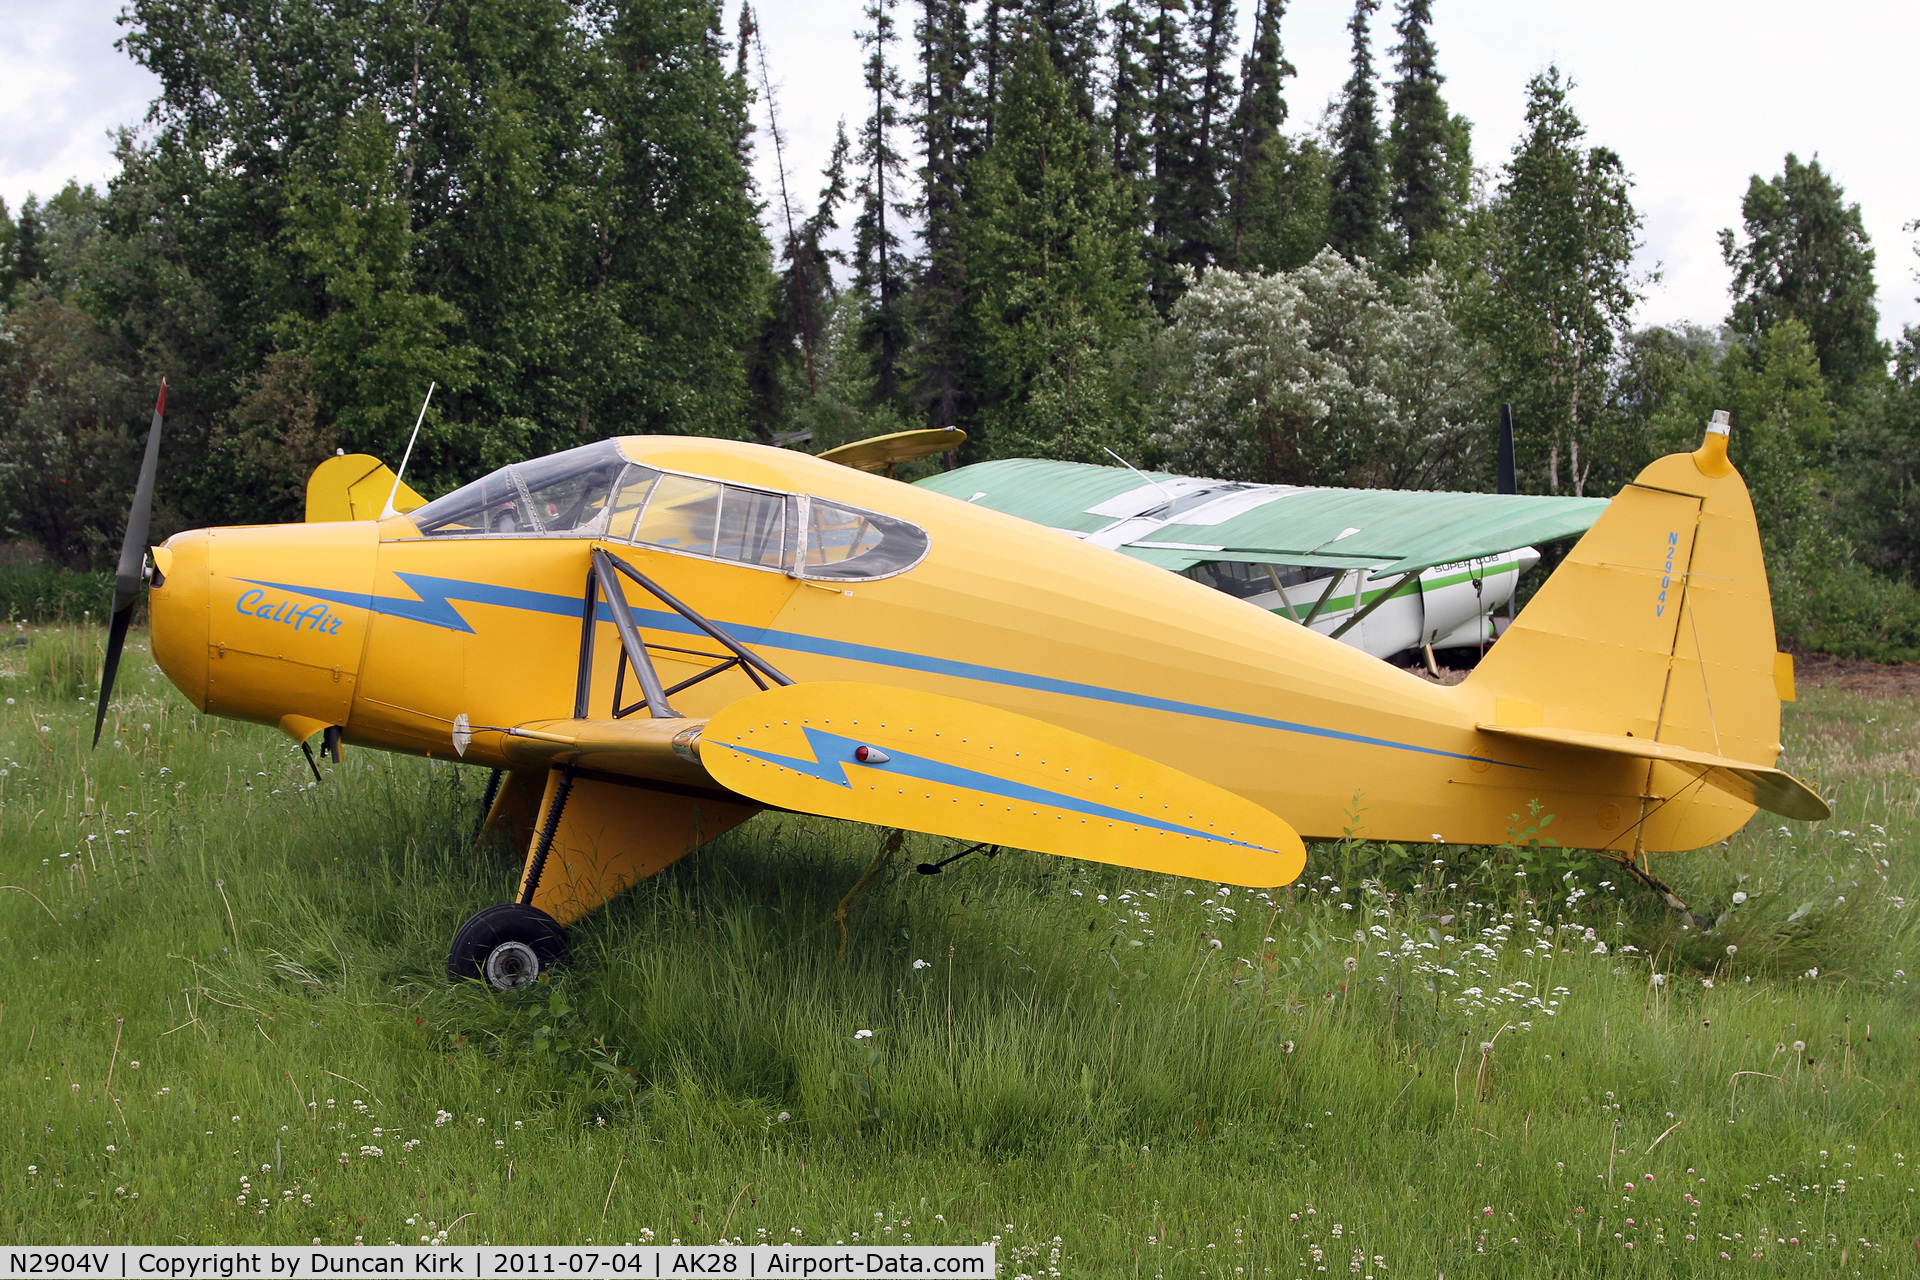 N2904V, 1948 Callair A-3 C/N 120, How does this survive in this tough climate?